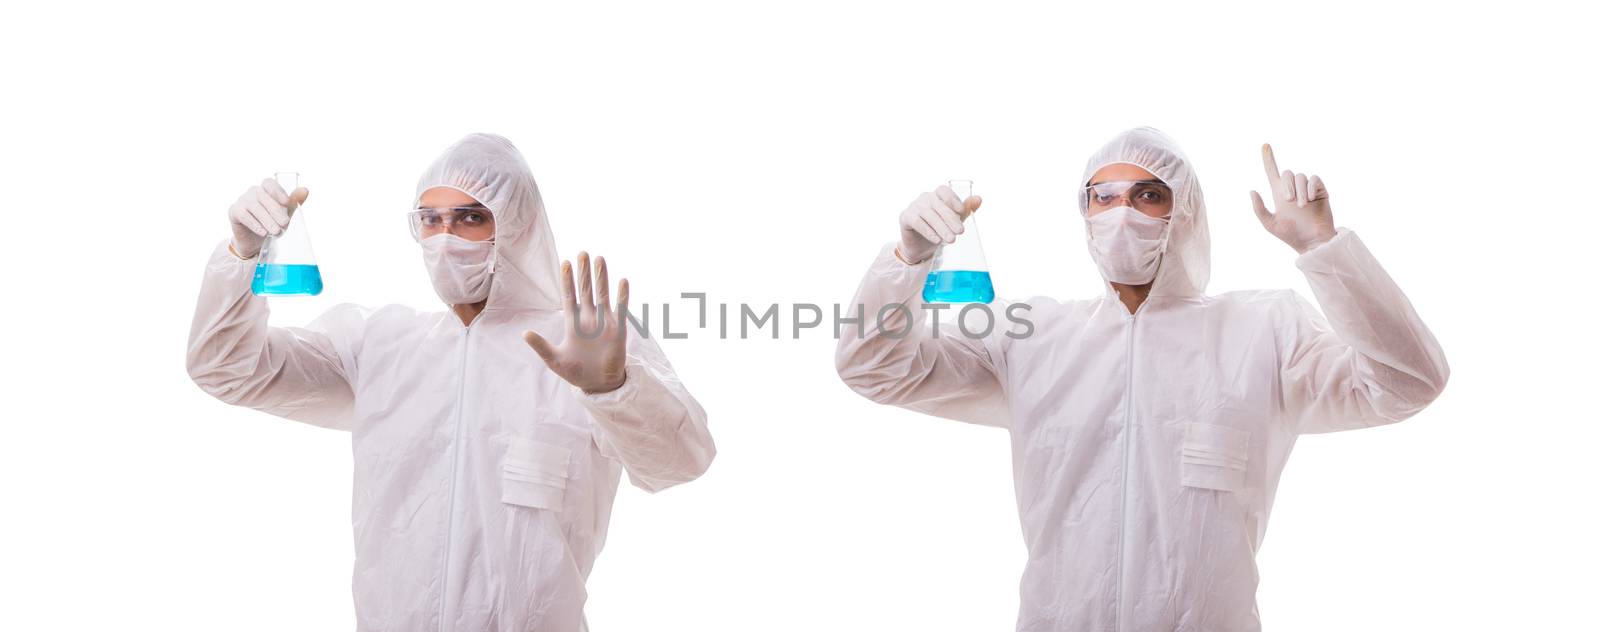 Chemist working with radioactive substances isolated on white background